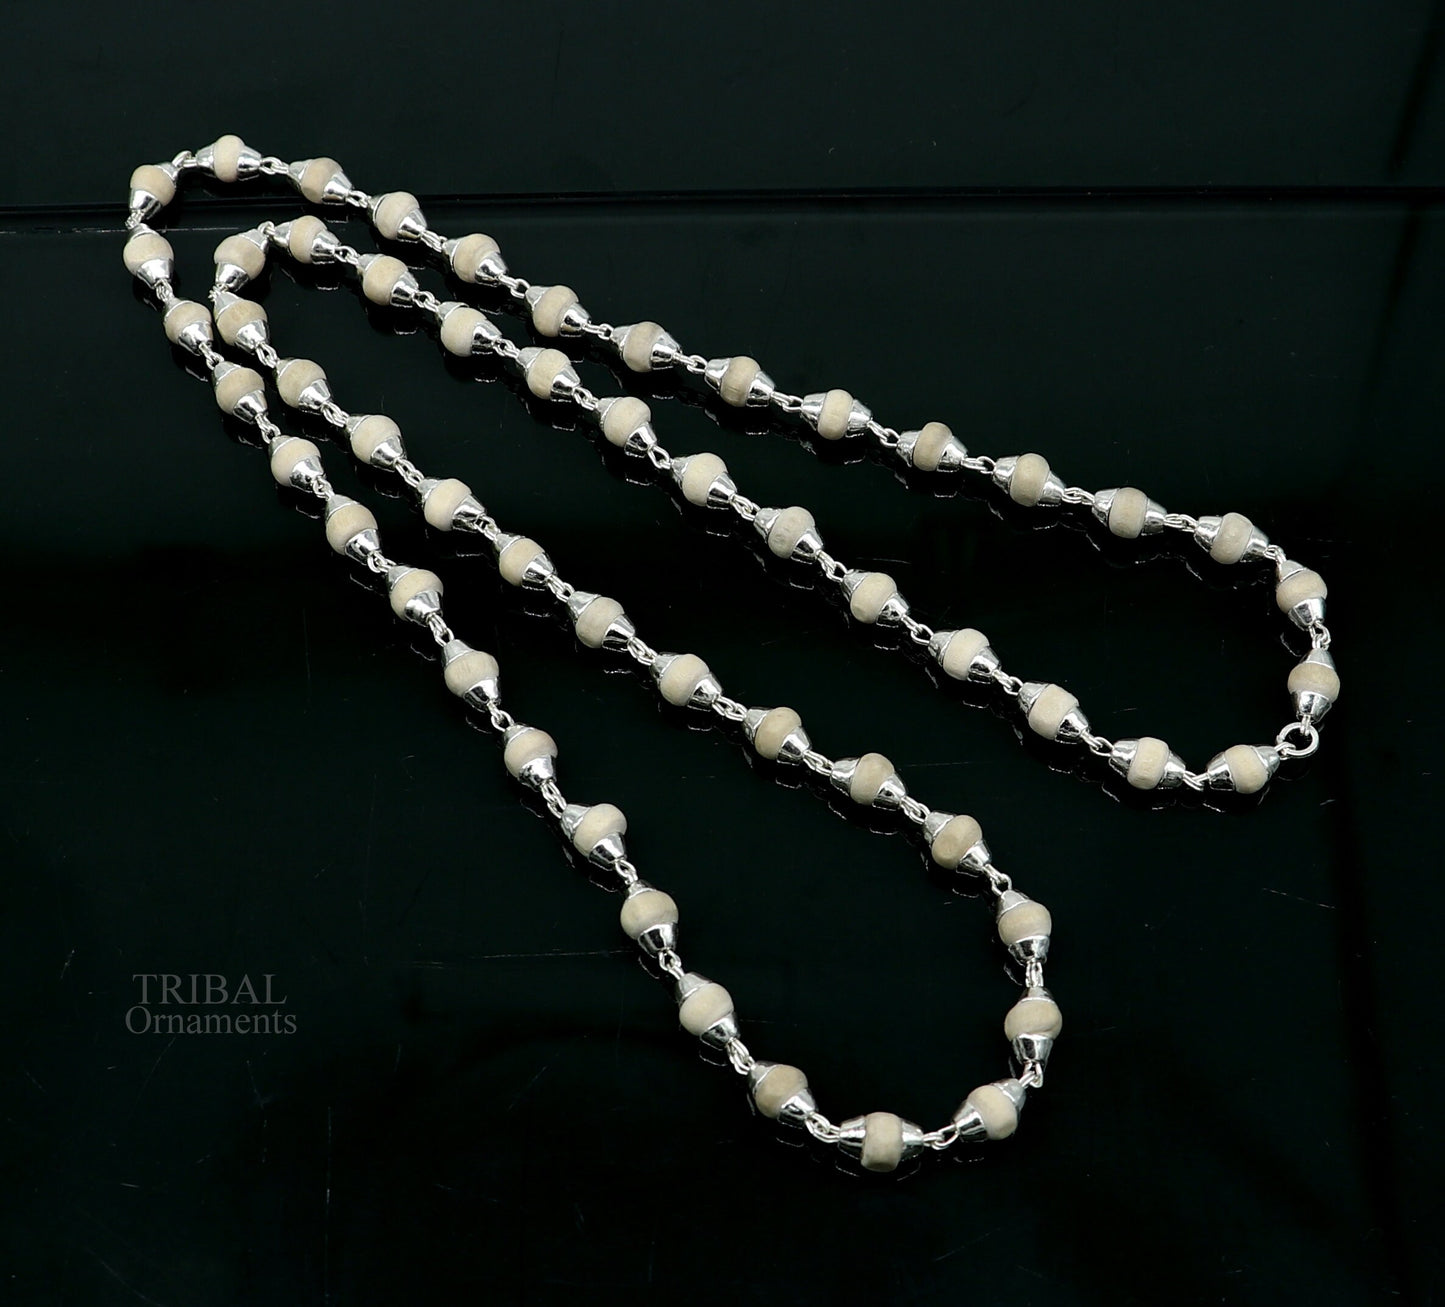 23" 5.5mm Sterling silver handmade Solid basil rosary plant wooden beads silver chain necklace tulsi mala use in Ayurveda meditation ch143 - TRIBAL ORNAMENTS